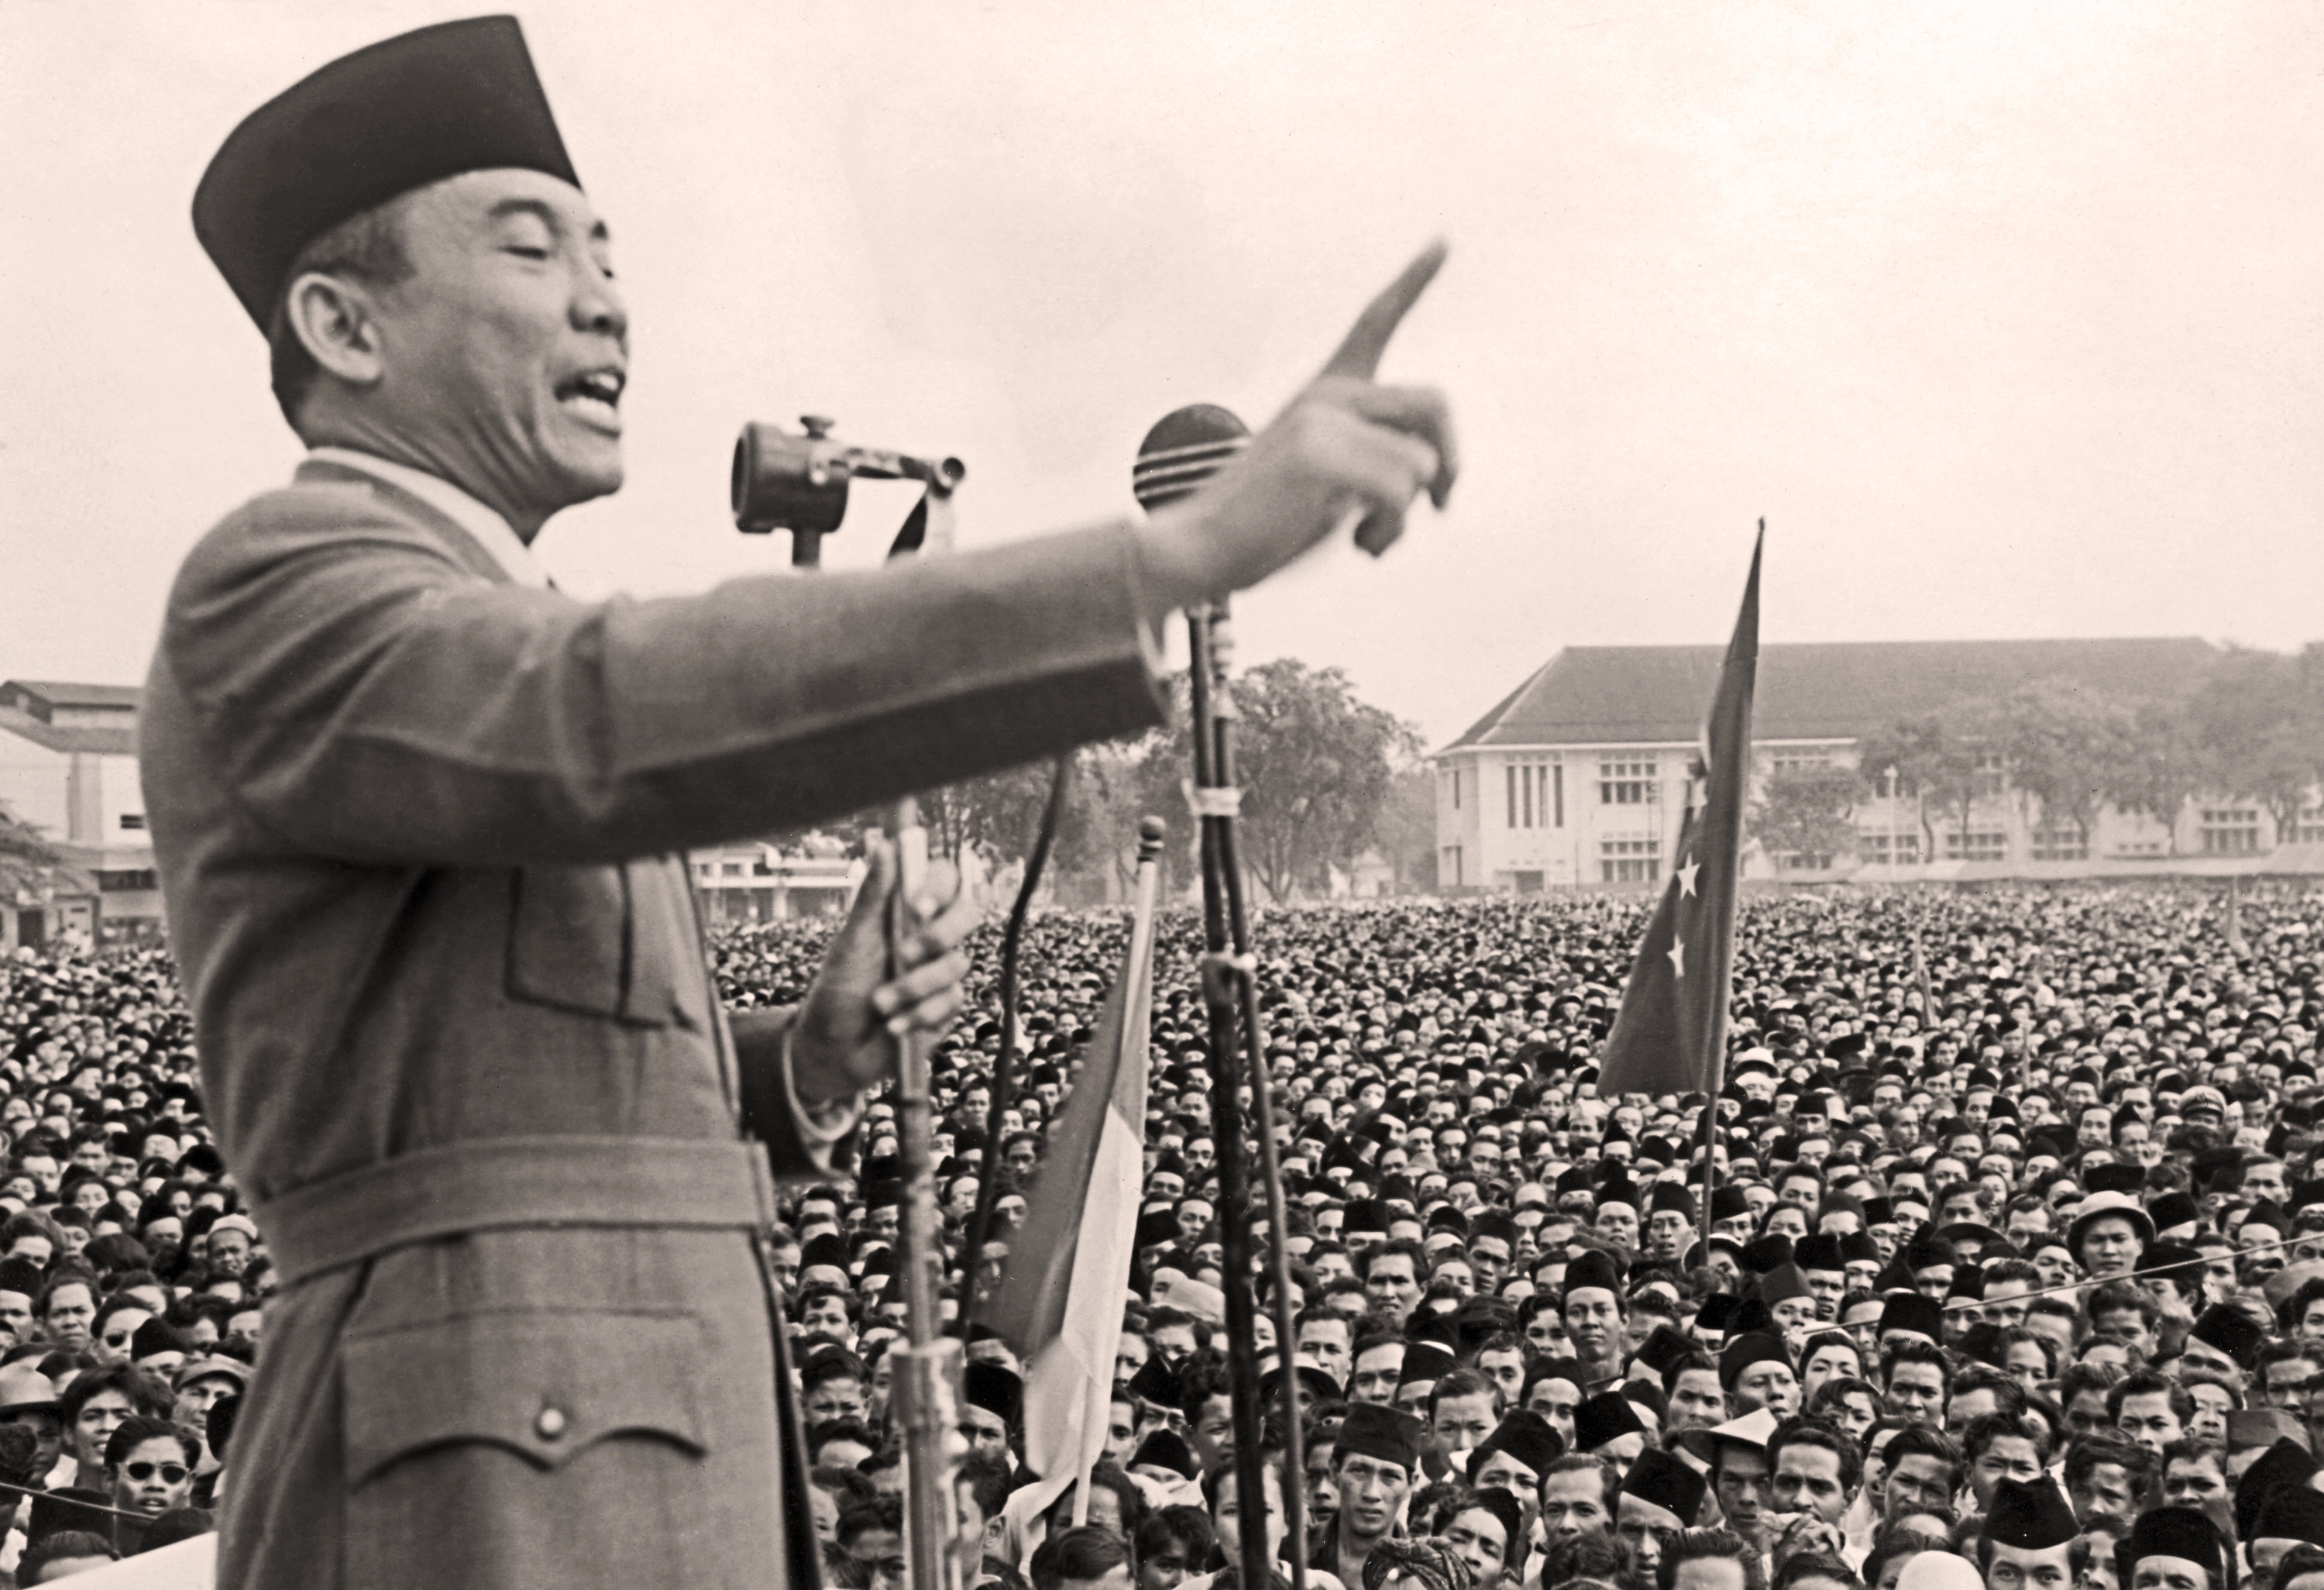 Sukarno addresses a rally of 200,000 people in Macassar, demanding independence from the Netherlands in an undated photo. To equate the “Asia by Asians” vision to the Monroe Doctrine is the ultimate insult to Asia’s desire to determine its own fate. Photo: AFP